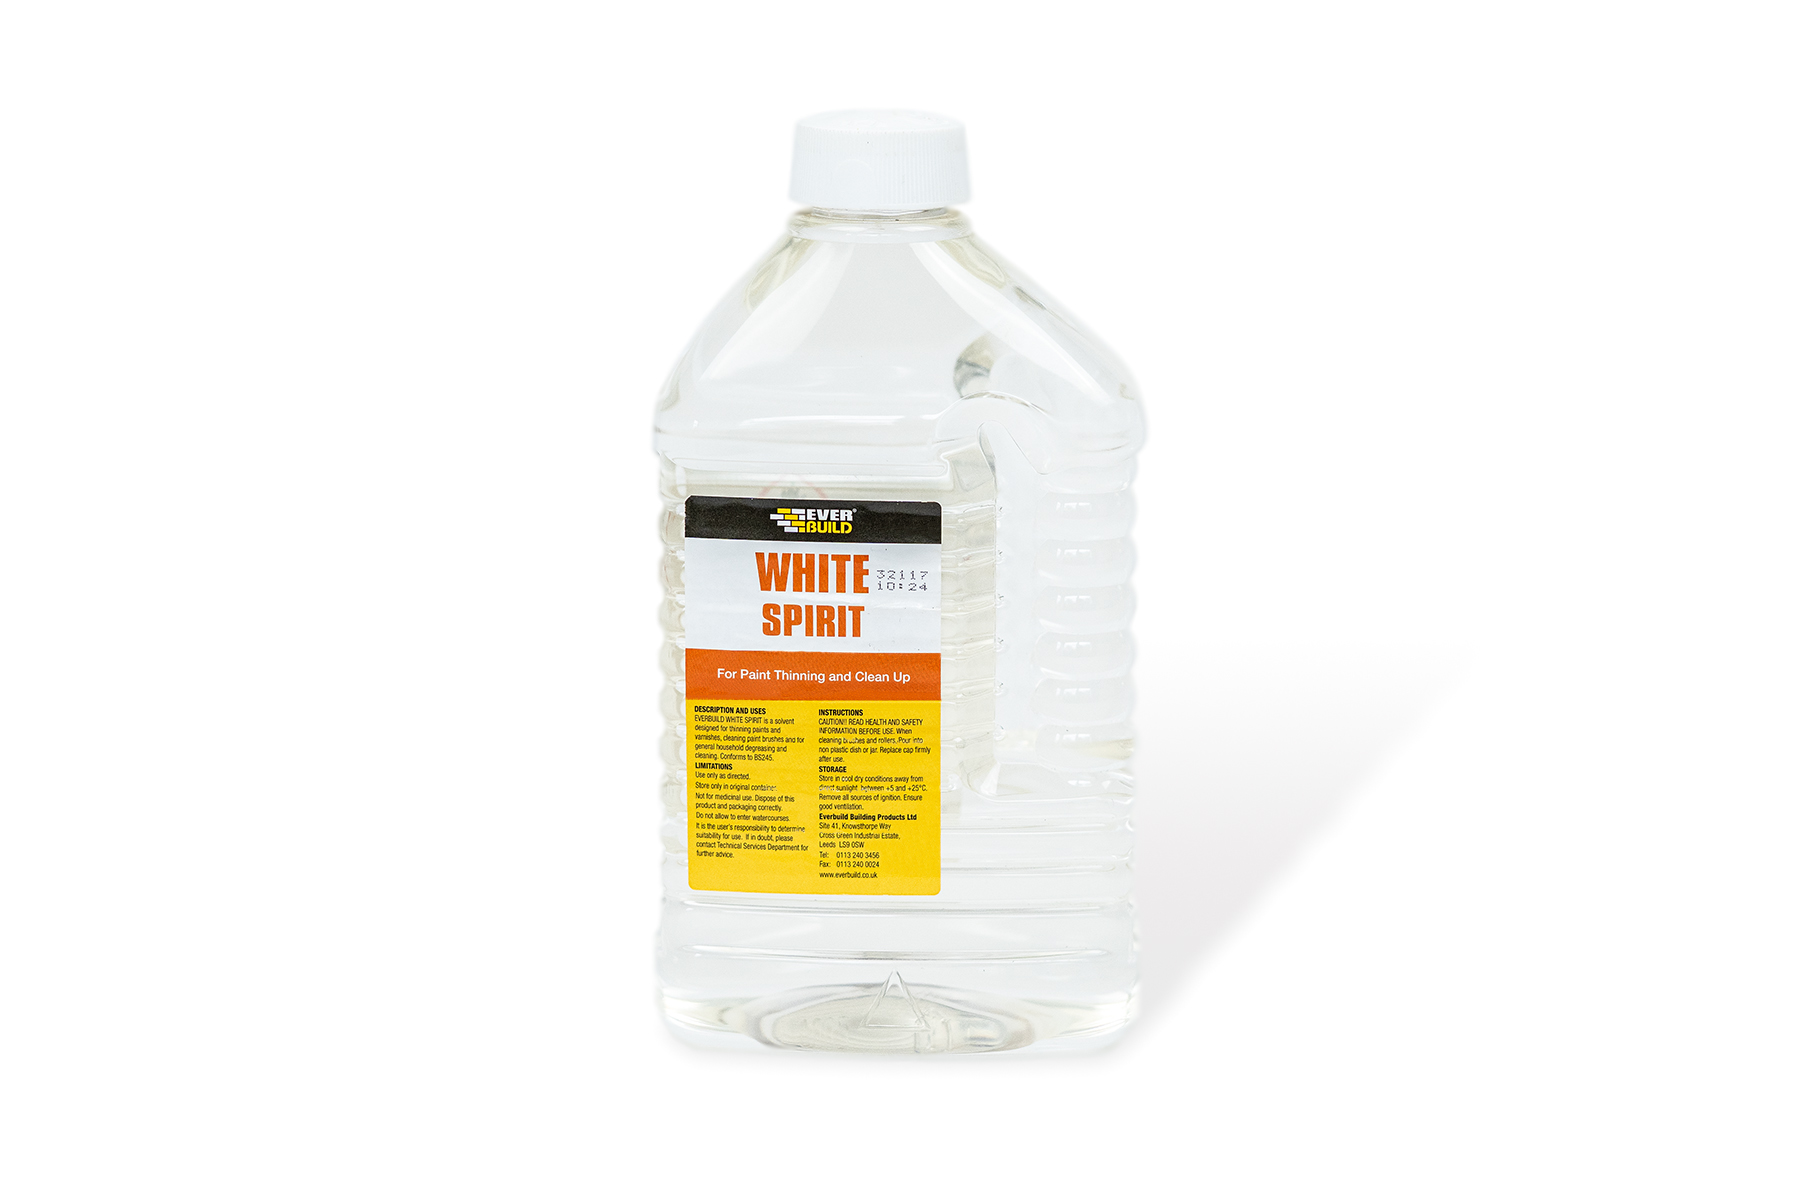 How to safely dispose of white spirit